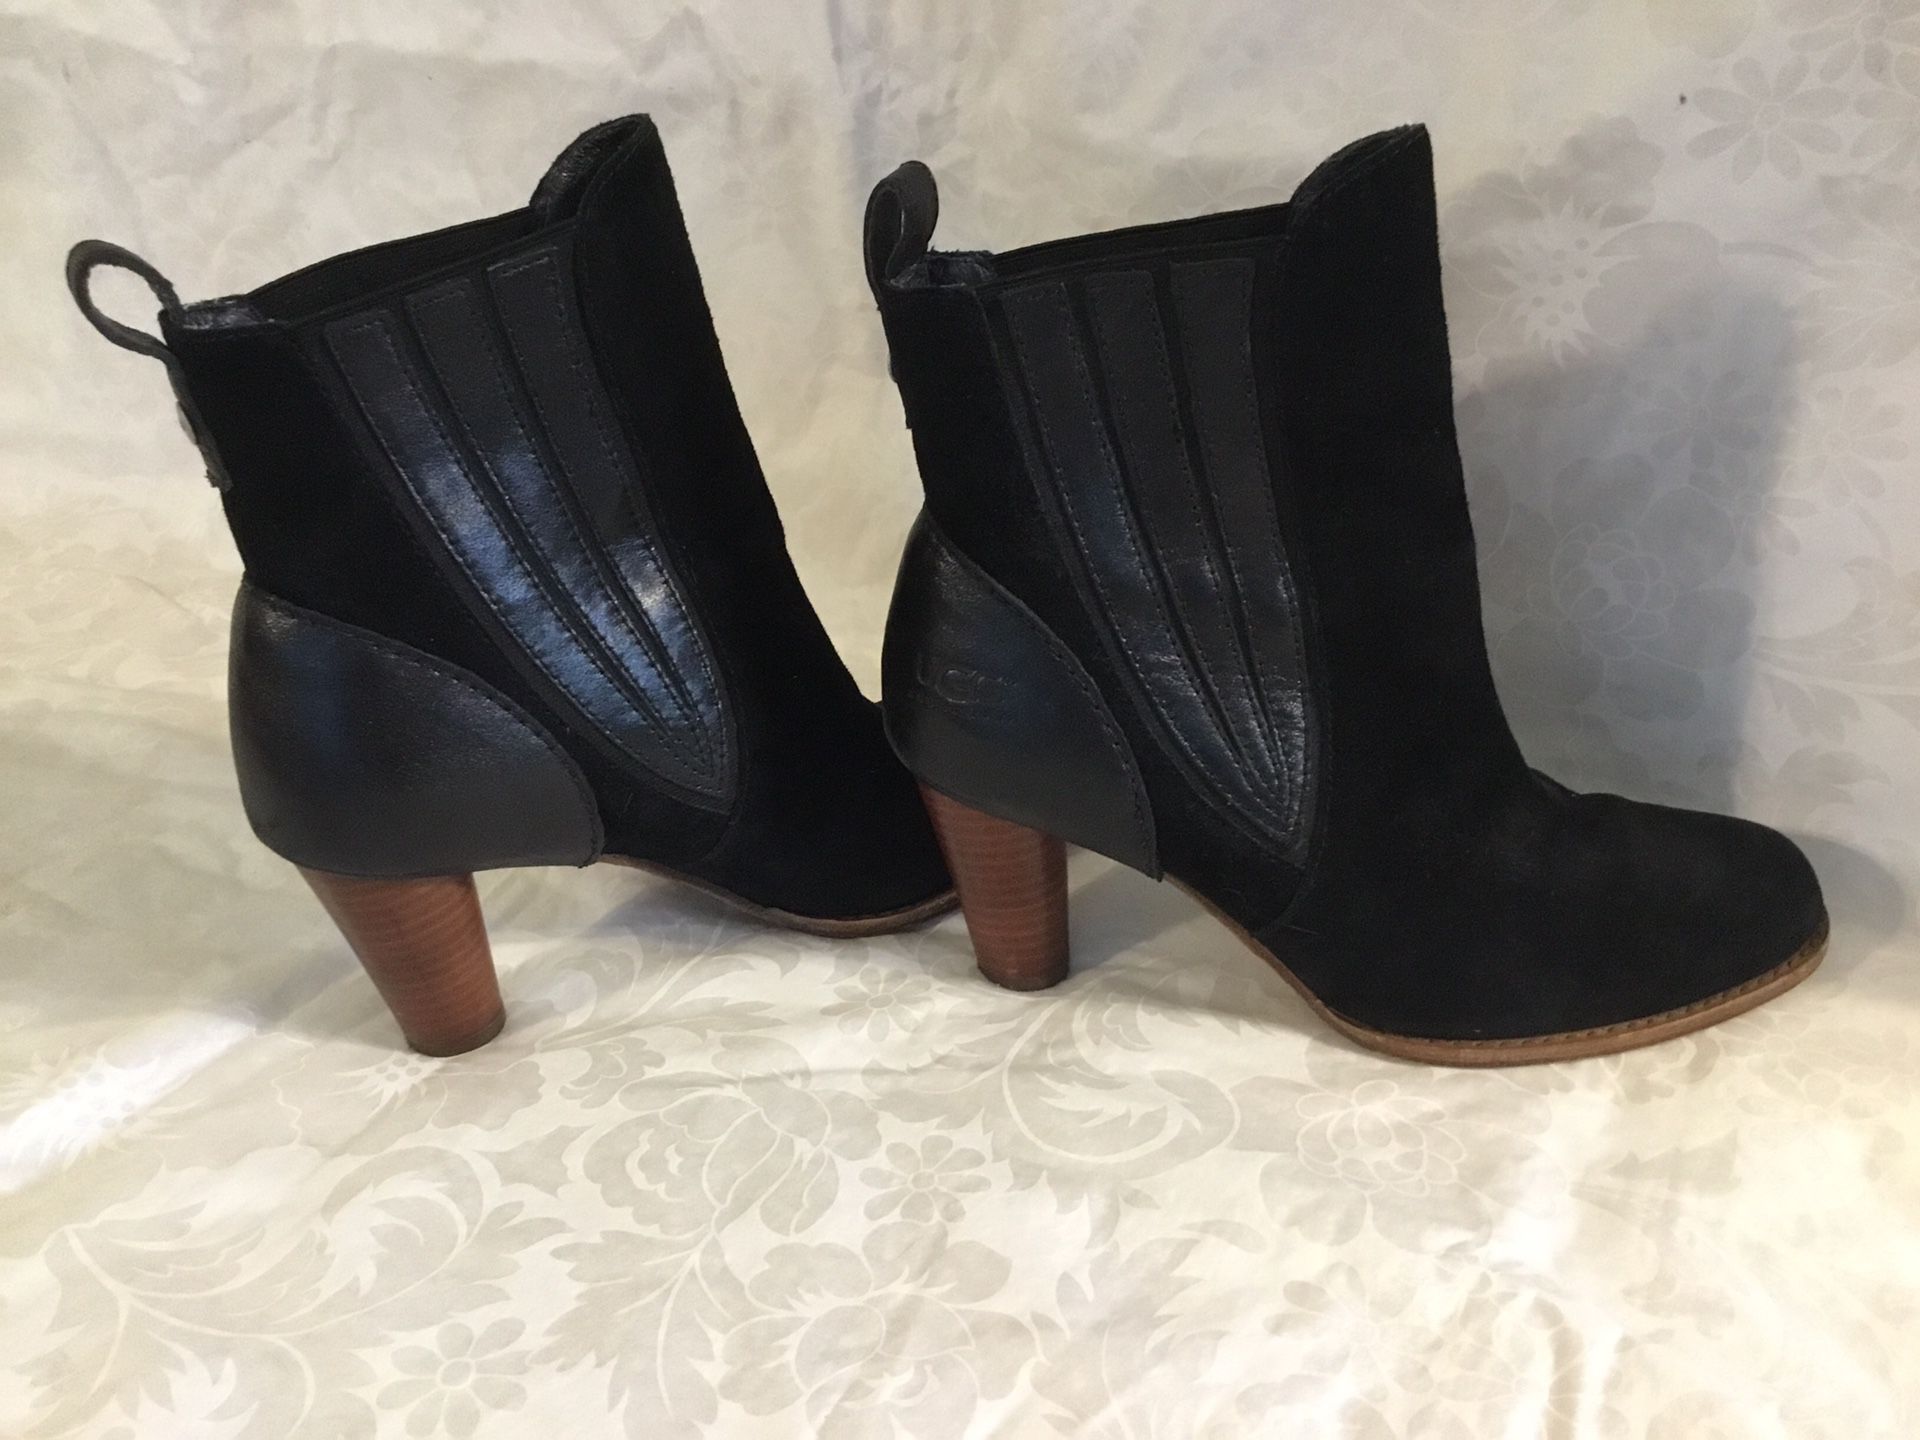 UGG Ankle Boots, size 8.5